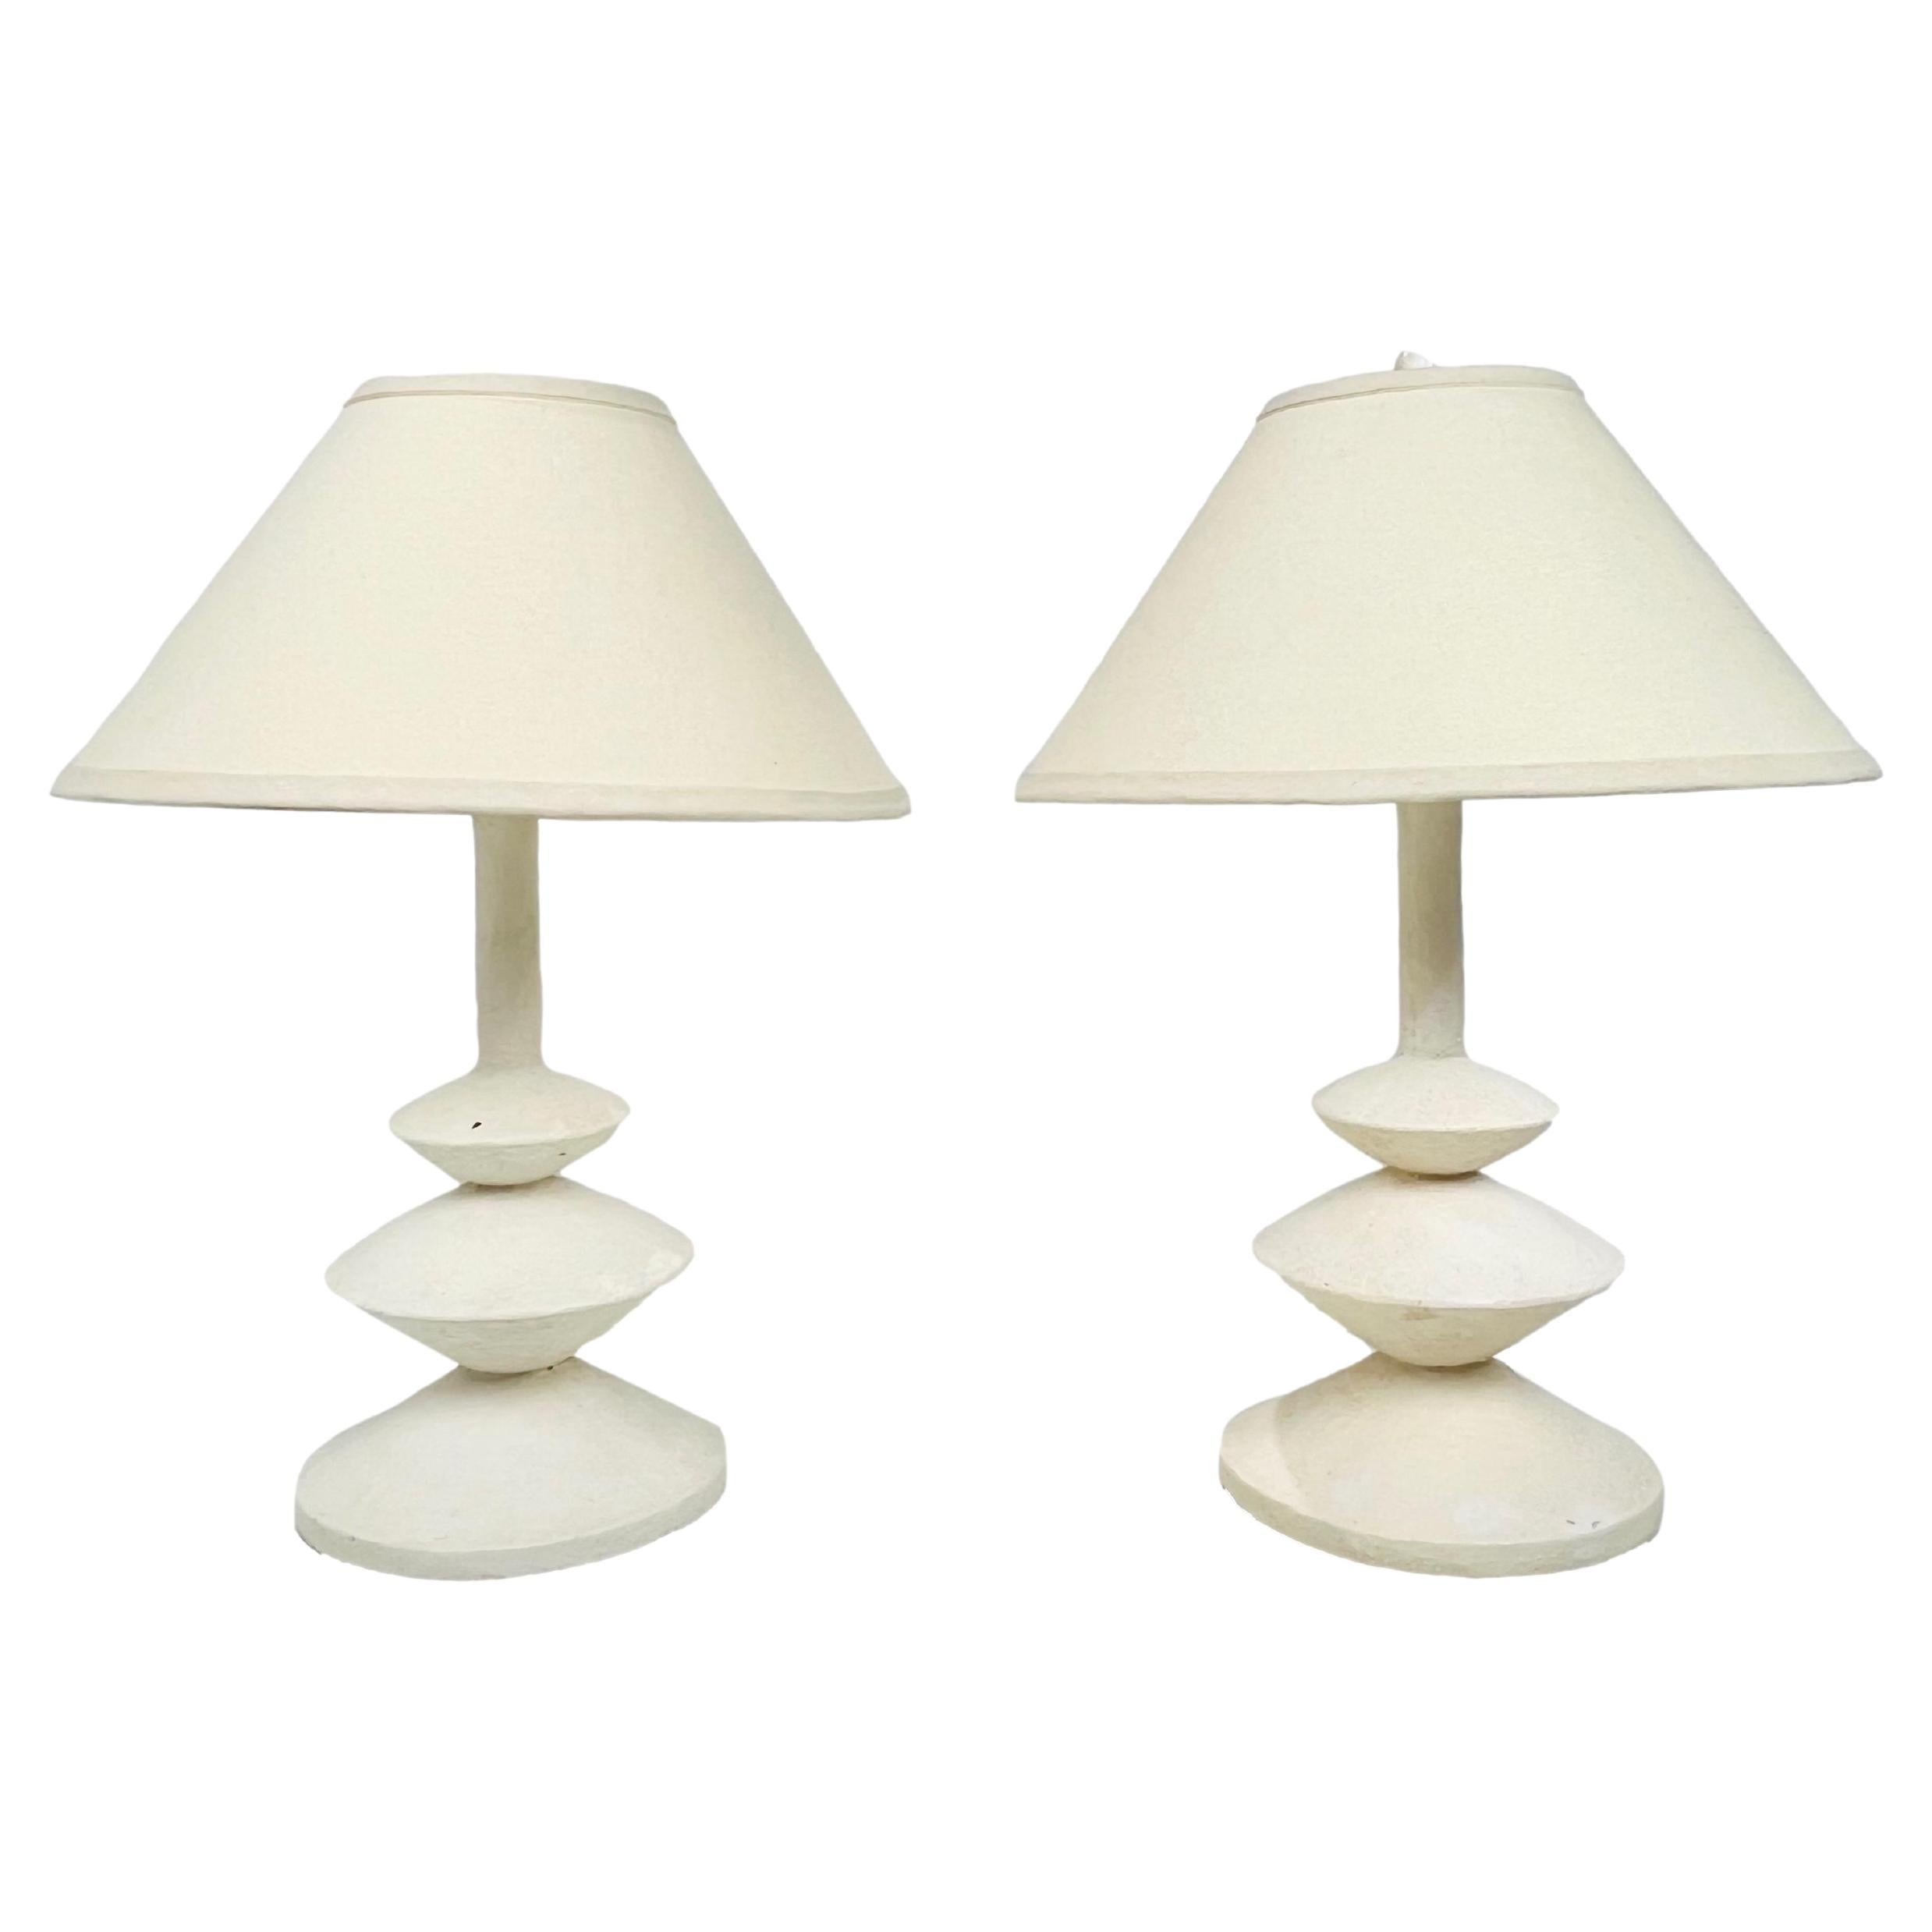 Pair of Plaster table lamps in the style of Giacometti